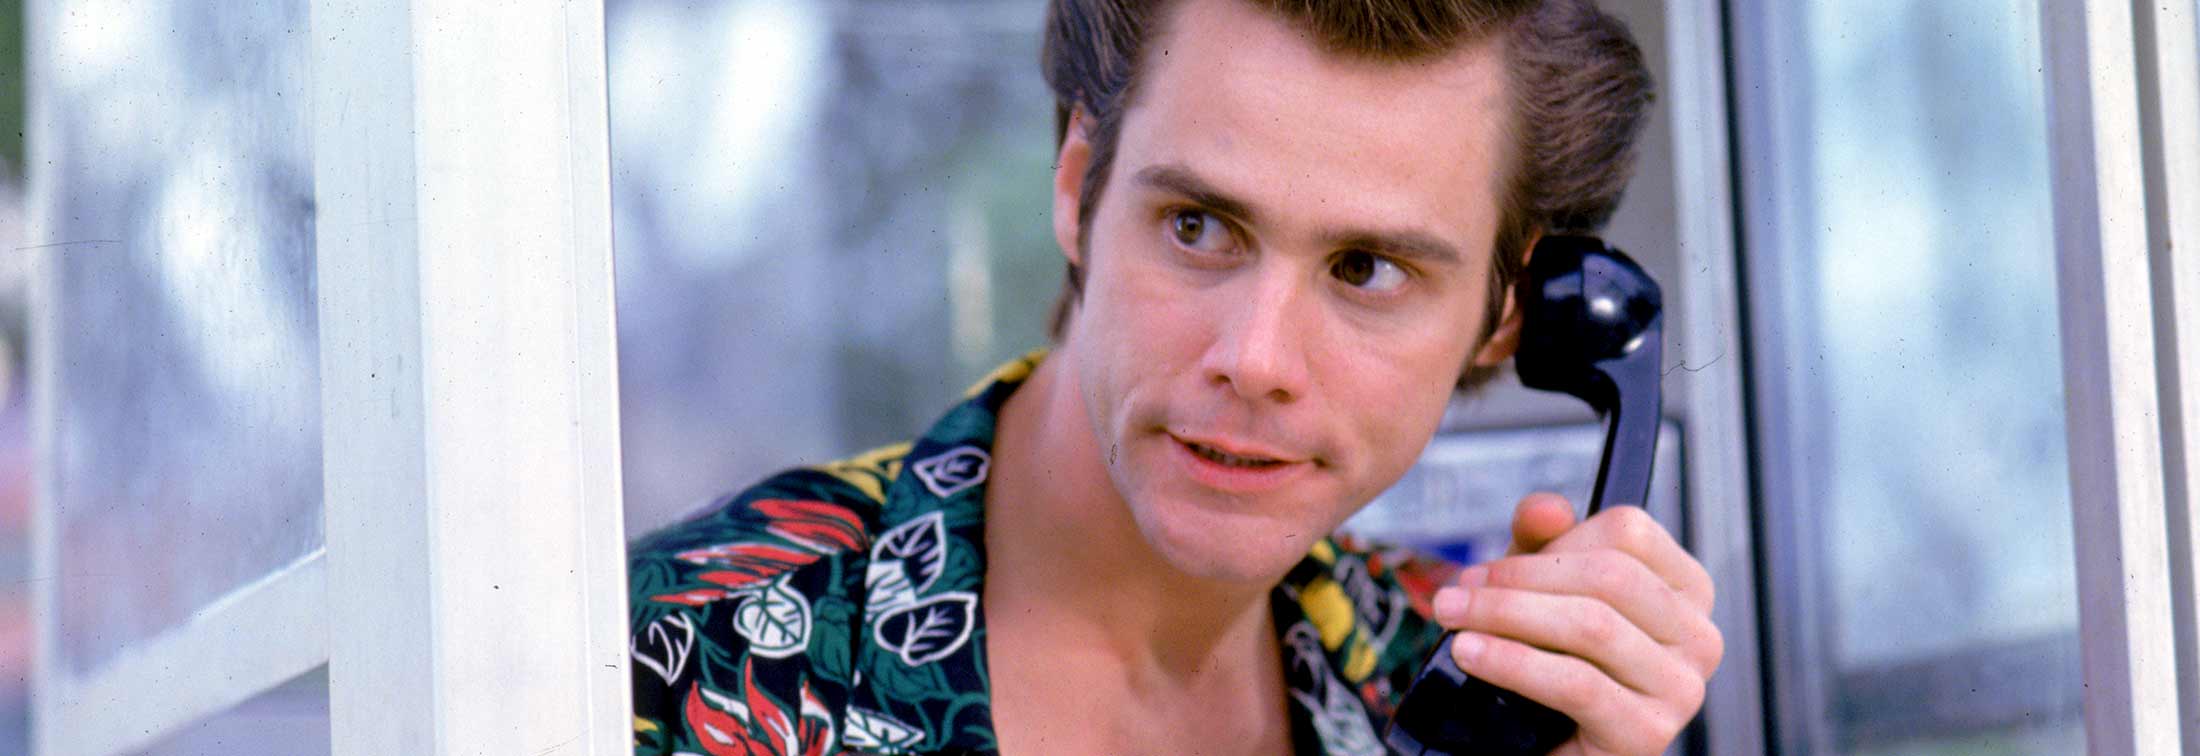 Ace Ventura: Pet Detective & When Nature Calls - Take home a double dose of Jim Carrey!